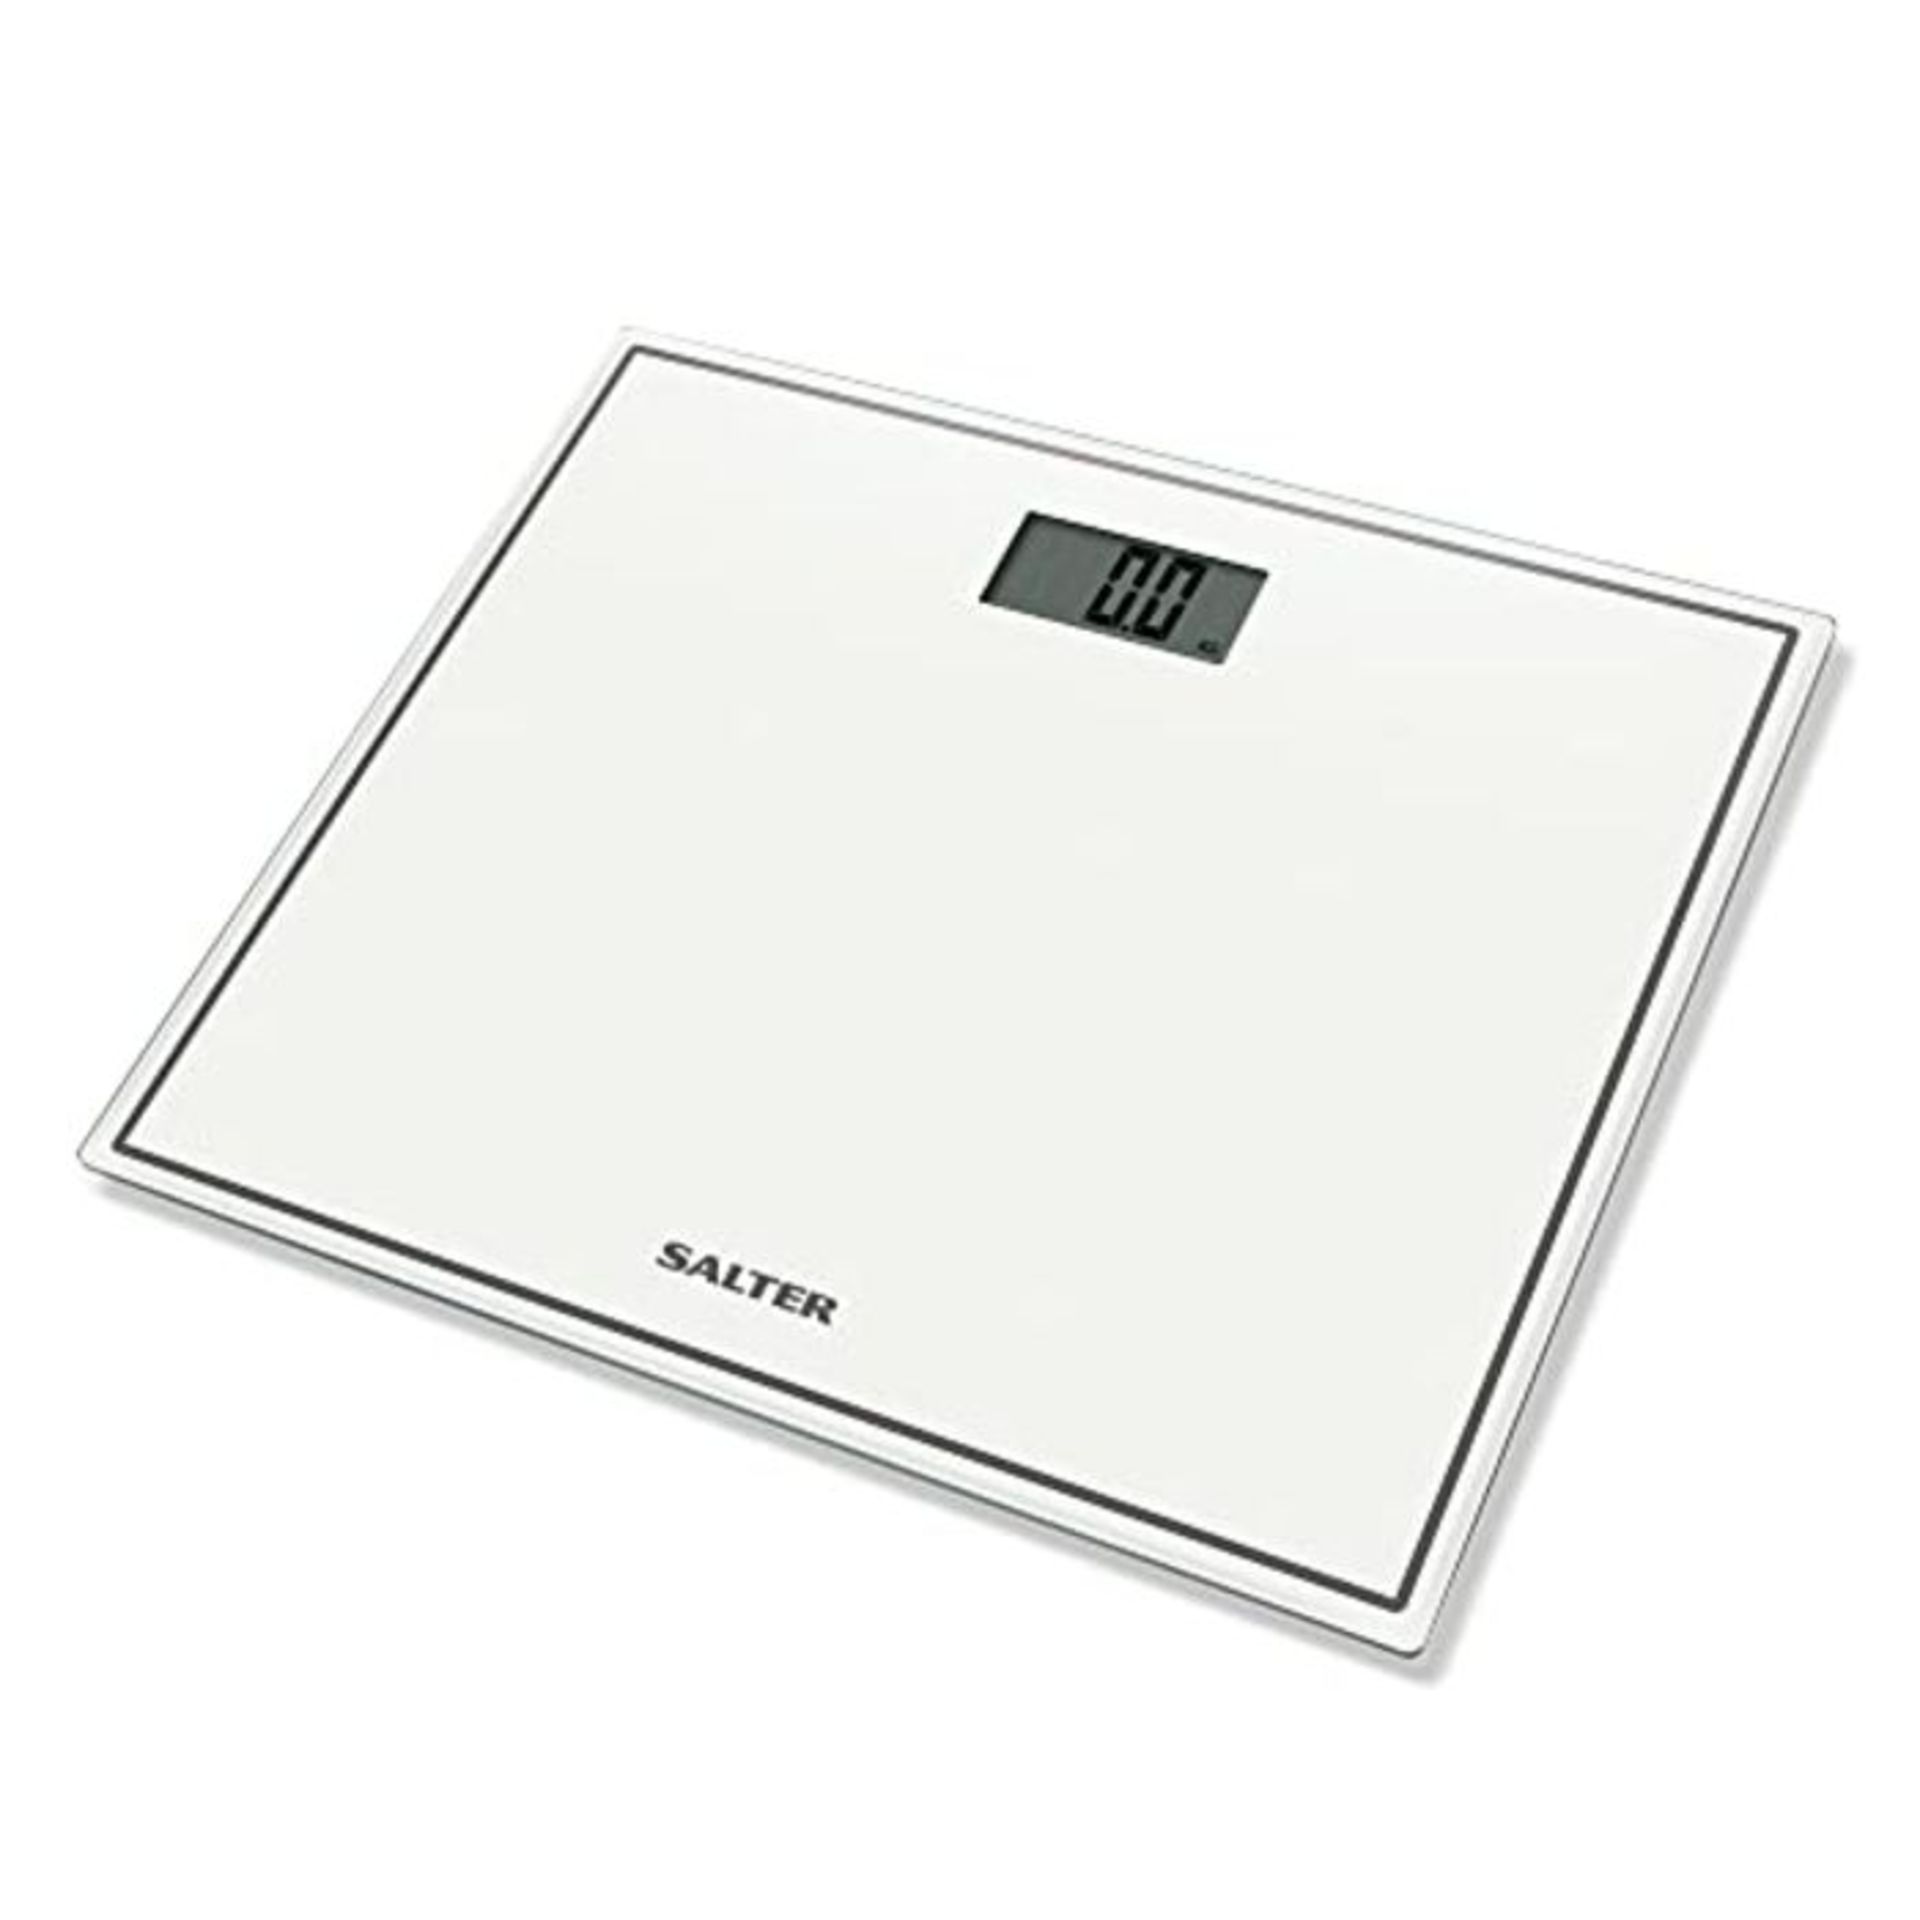 Salter Compact Digital Bathroom Scales - Toughened Glass, Measure Body Weight Metric /